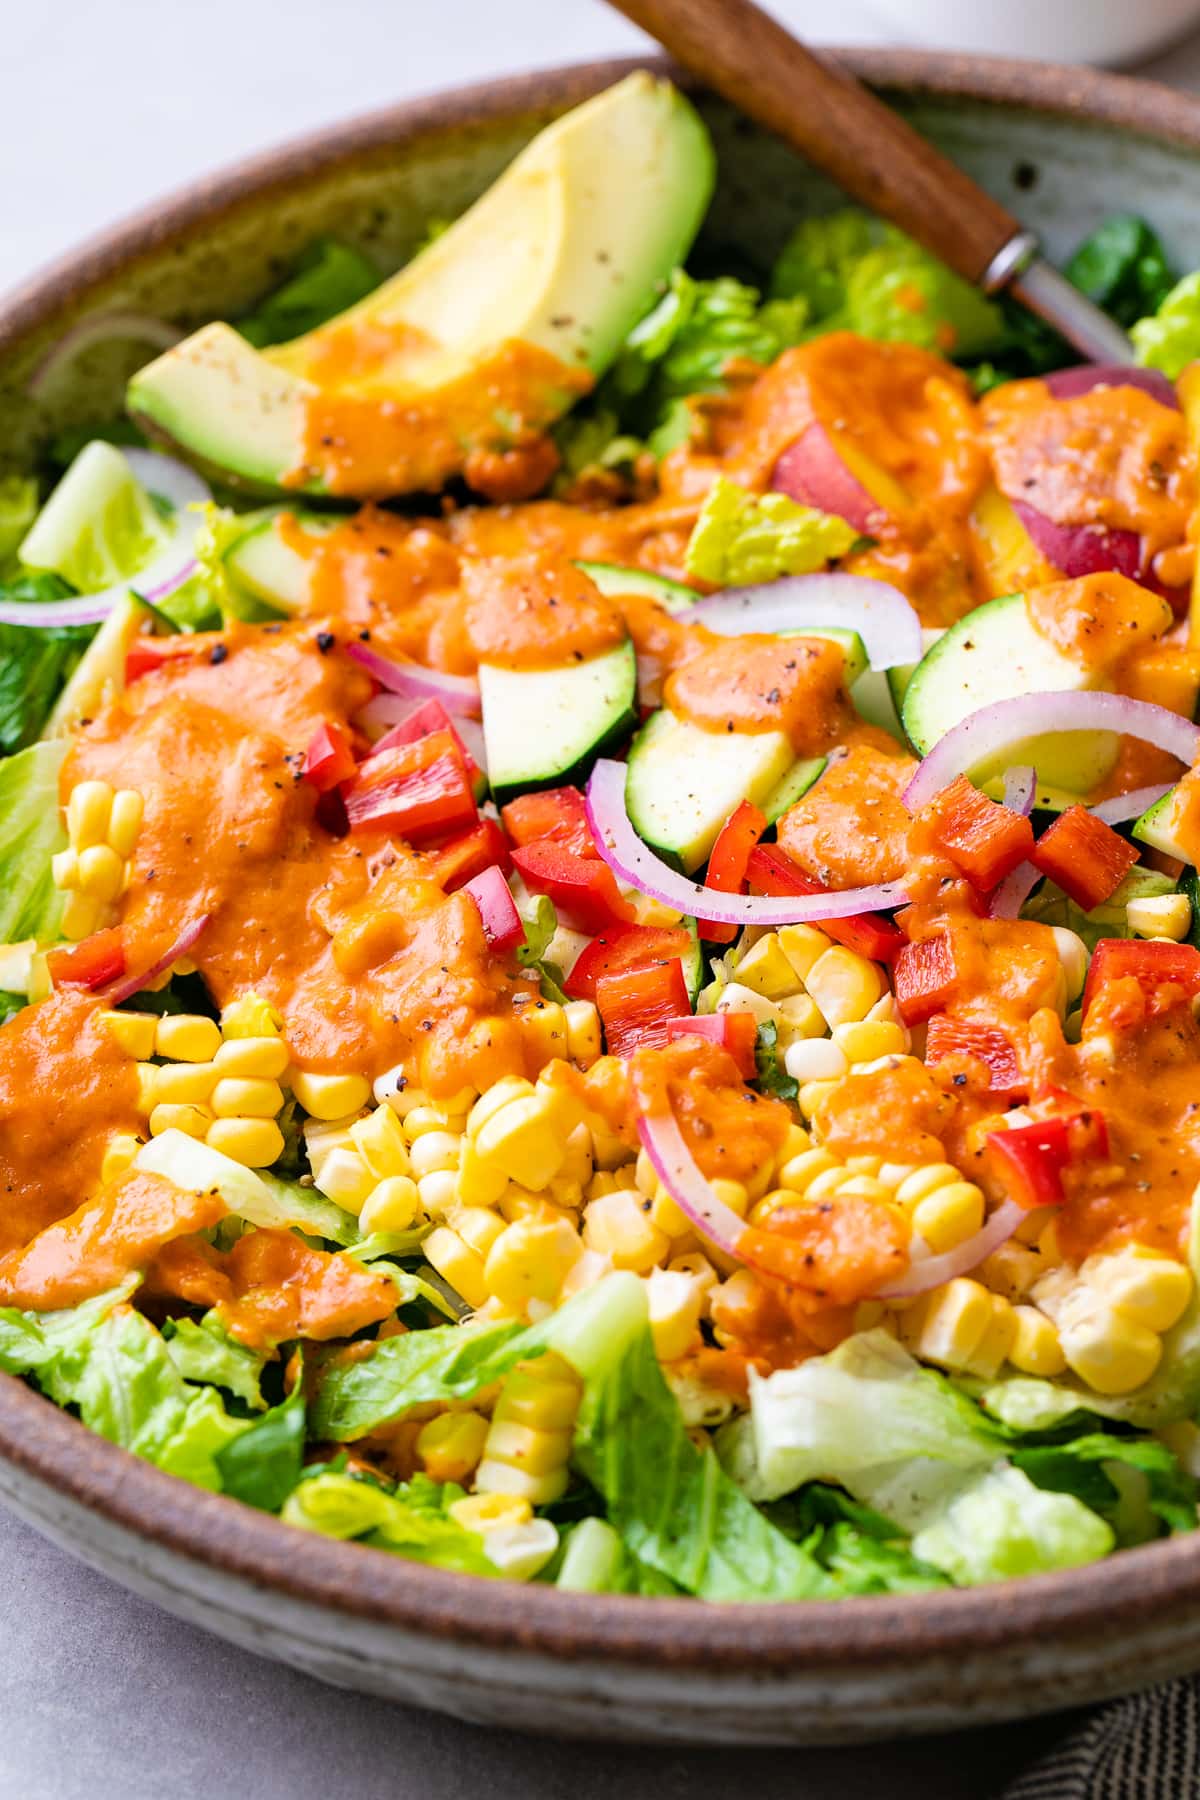 up close, side angle view of healthy farmer's market salad with sun-dried tomato vinaigrette in a bowl.